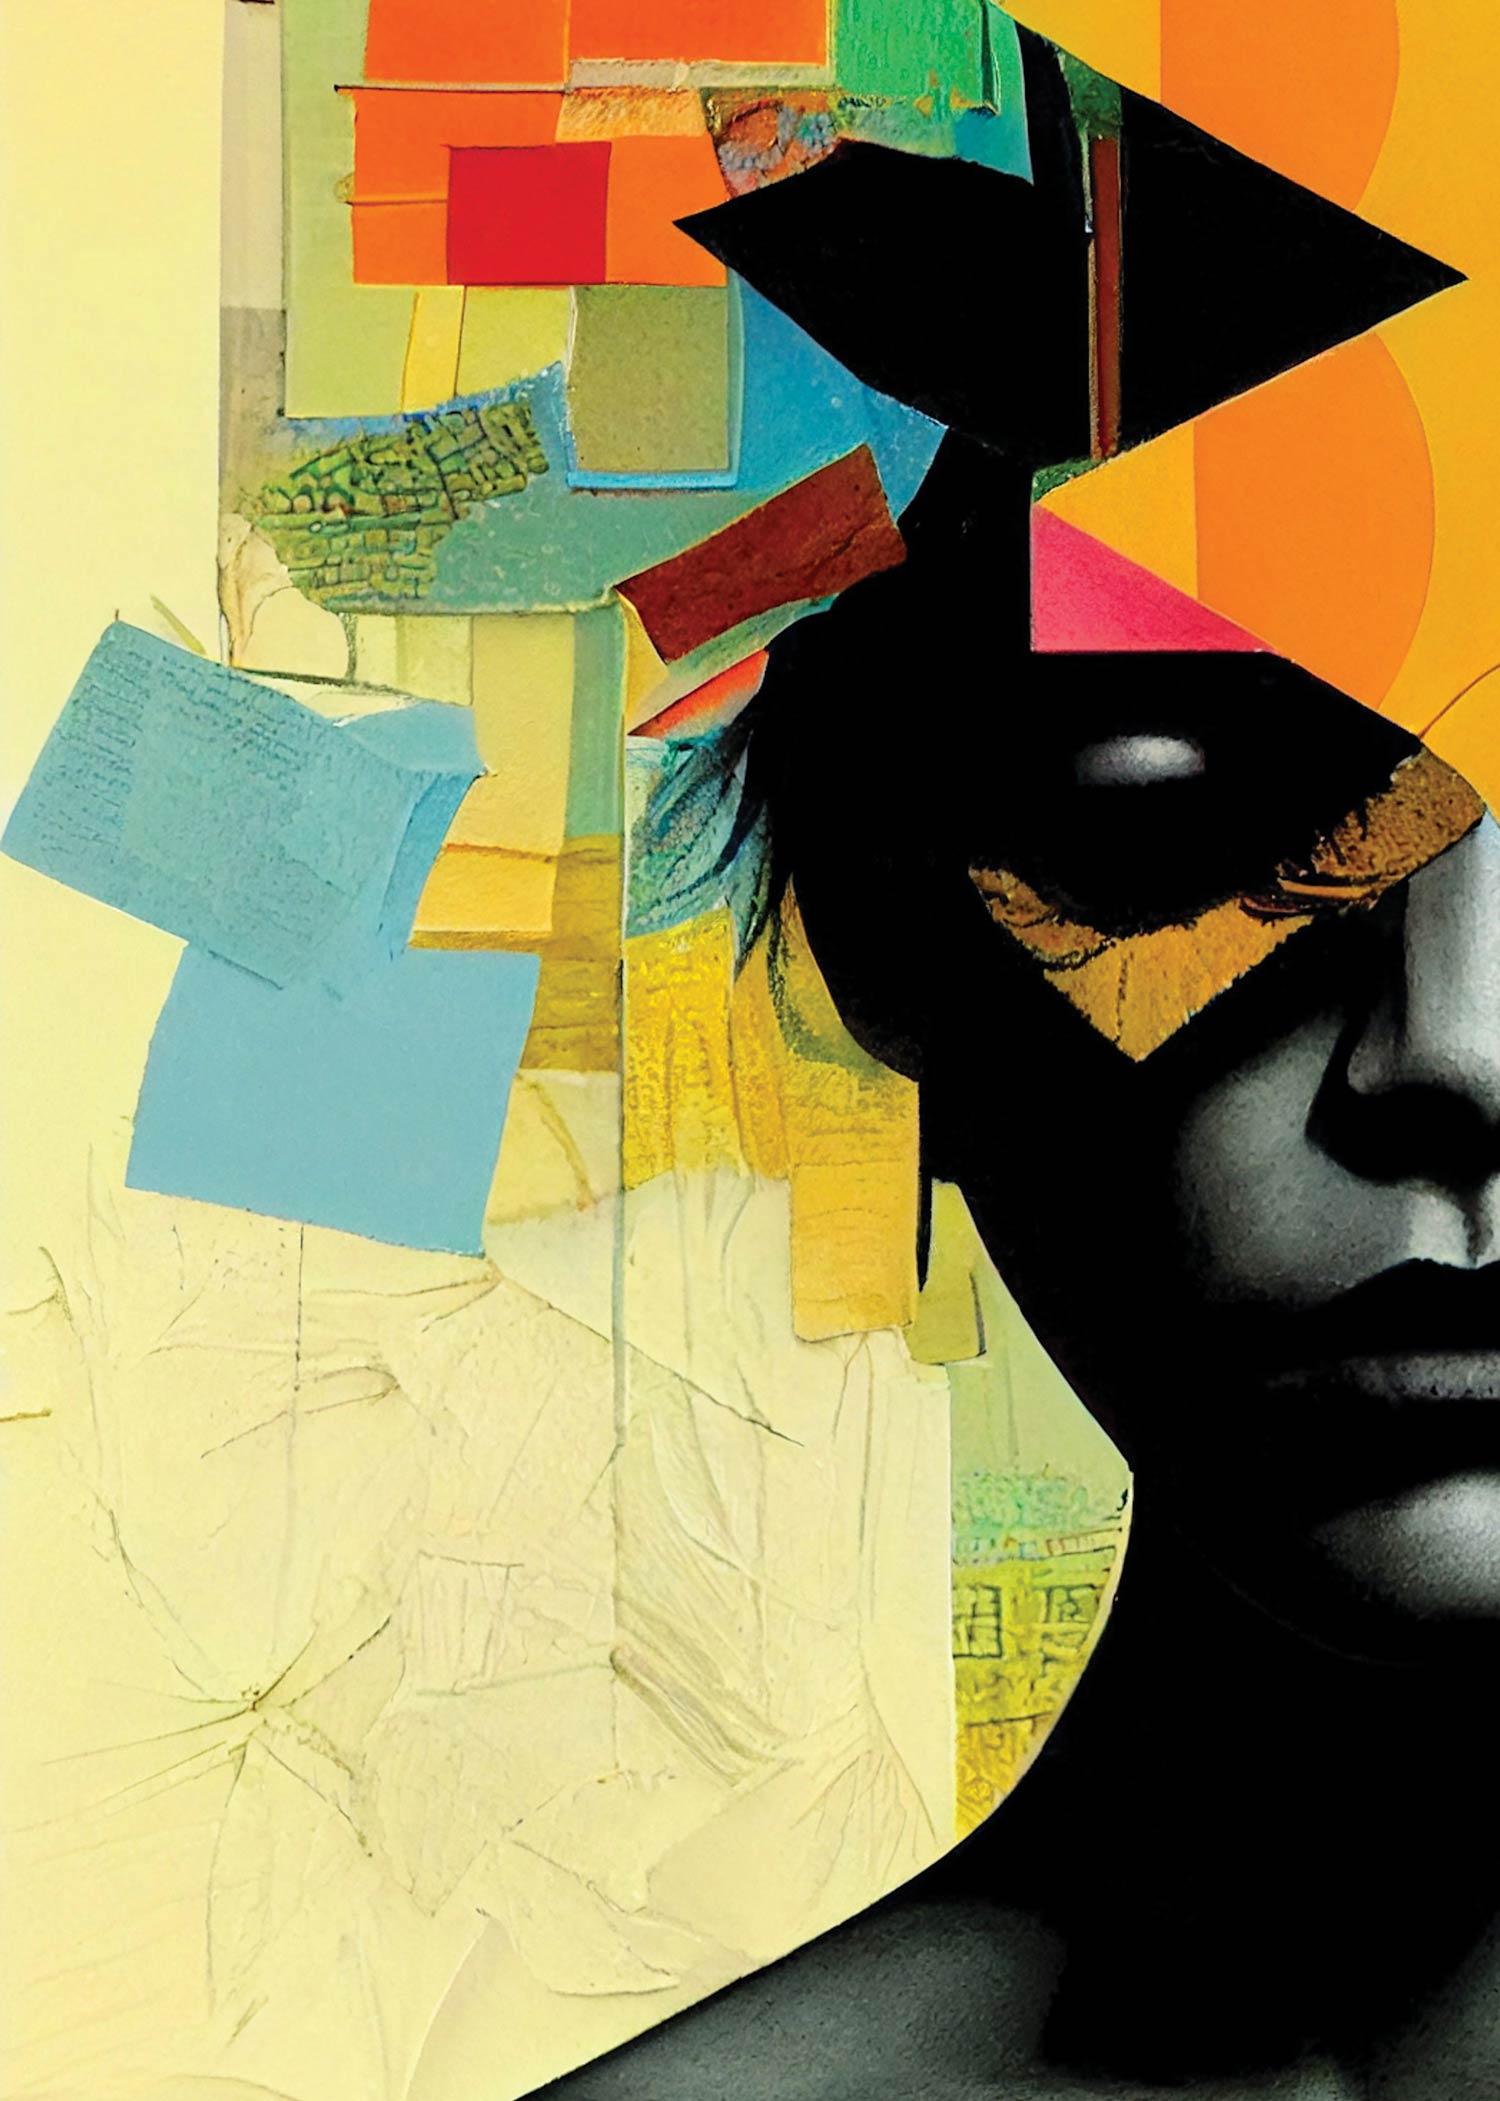 Painting of woman with abstract colorful shapes covering the top of her head